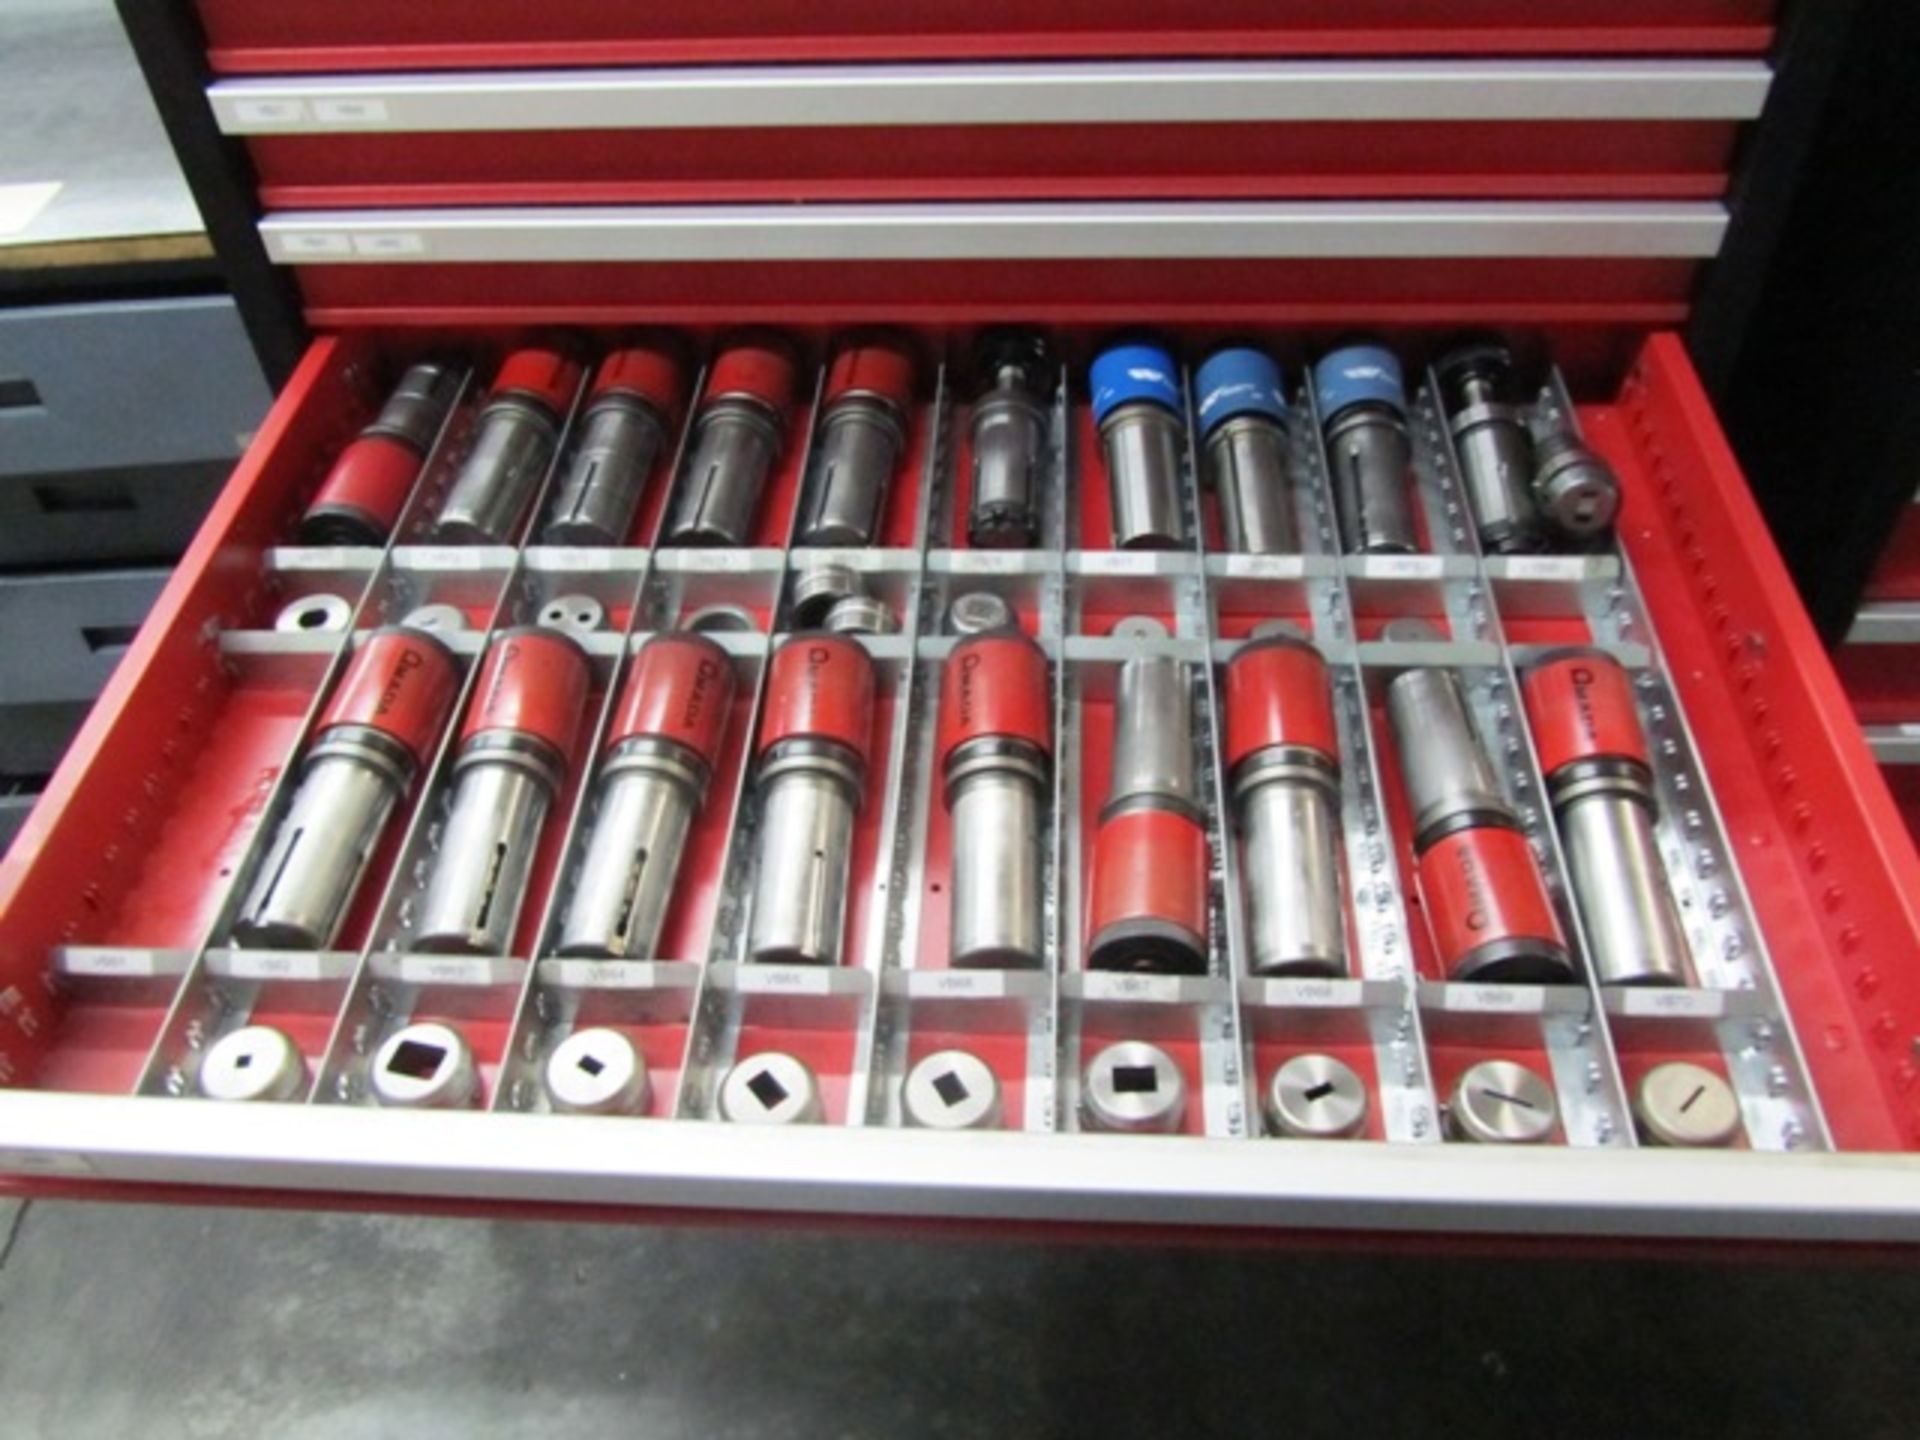 Amada 8 Drawer Portable Tool Cabinet with Turret Punches & Dies - Image 6 of 8